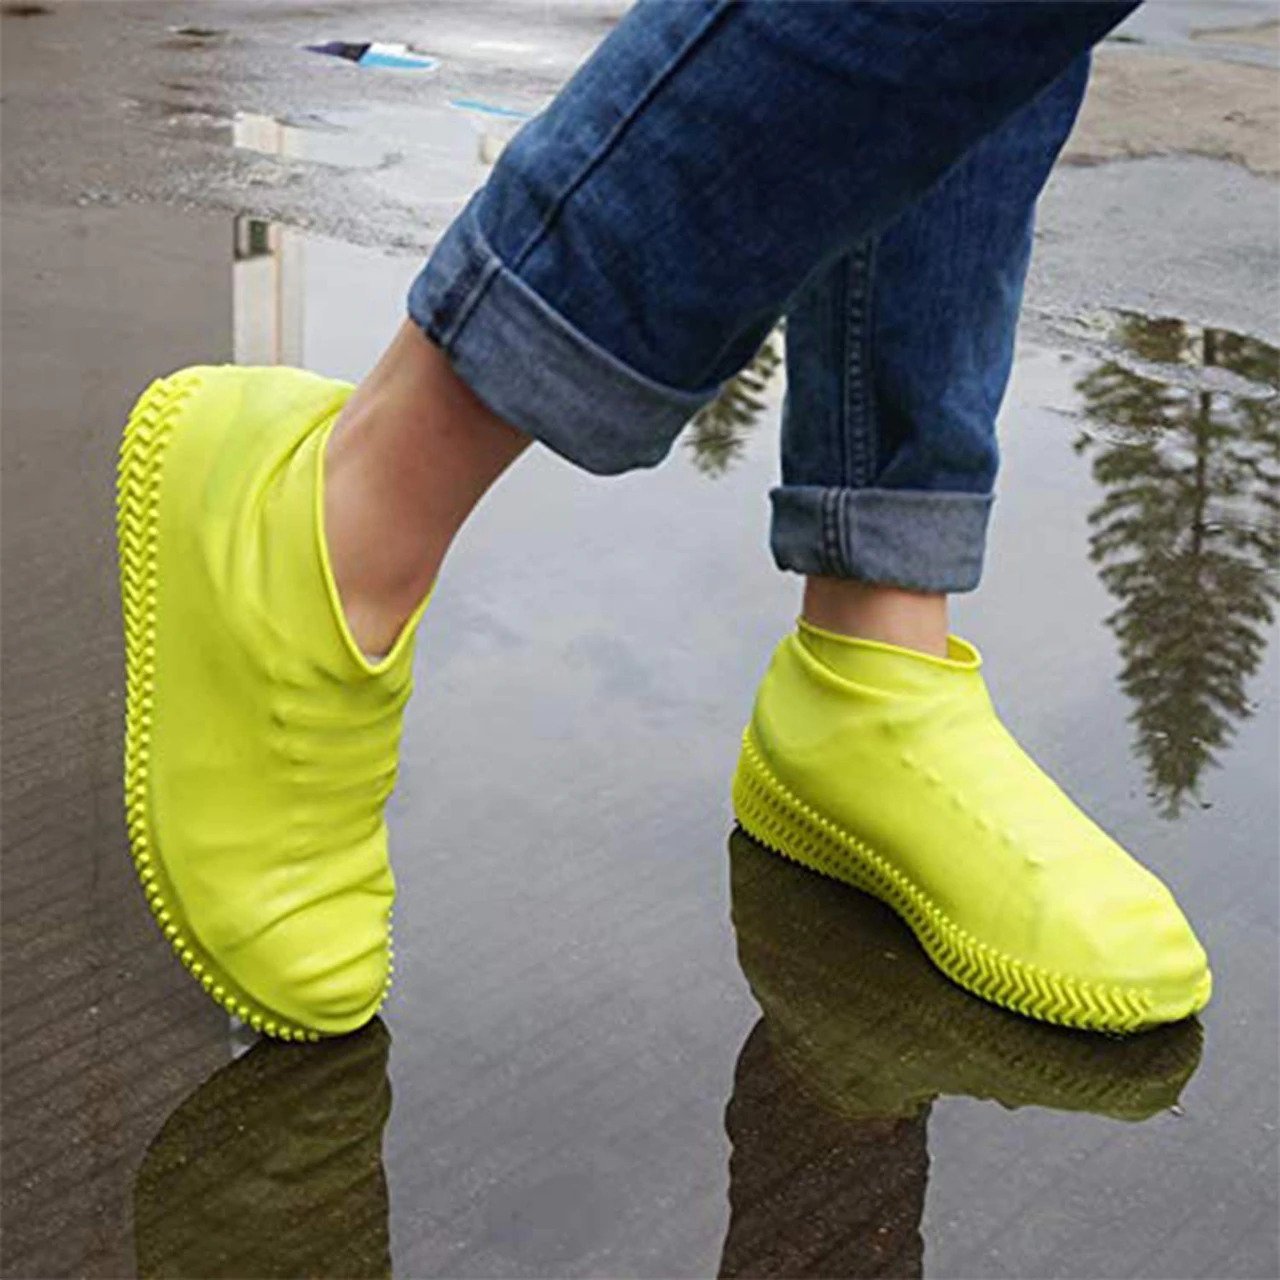 Silicone Waterproof Shoe Covers Pair